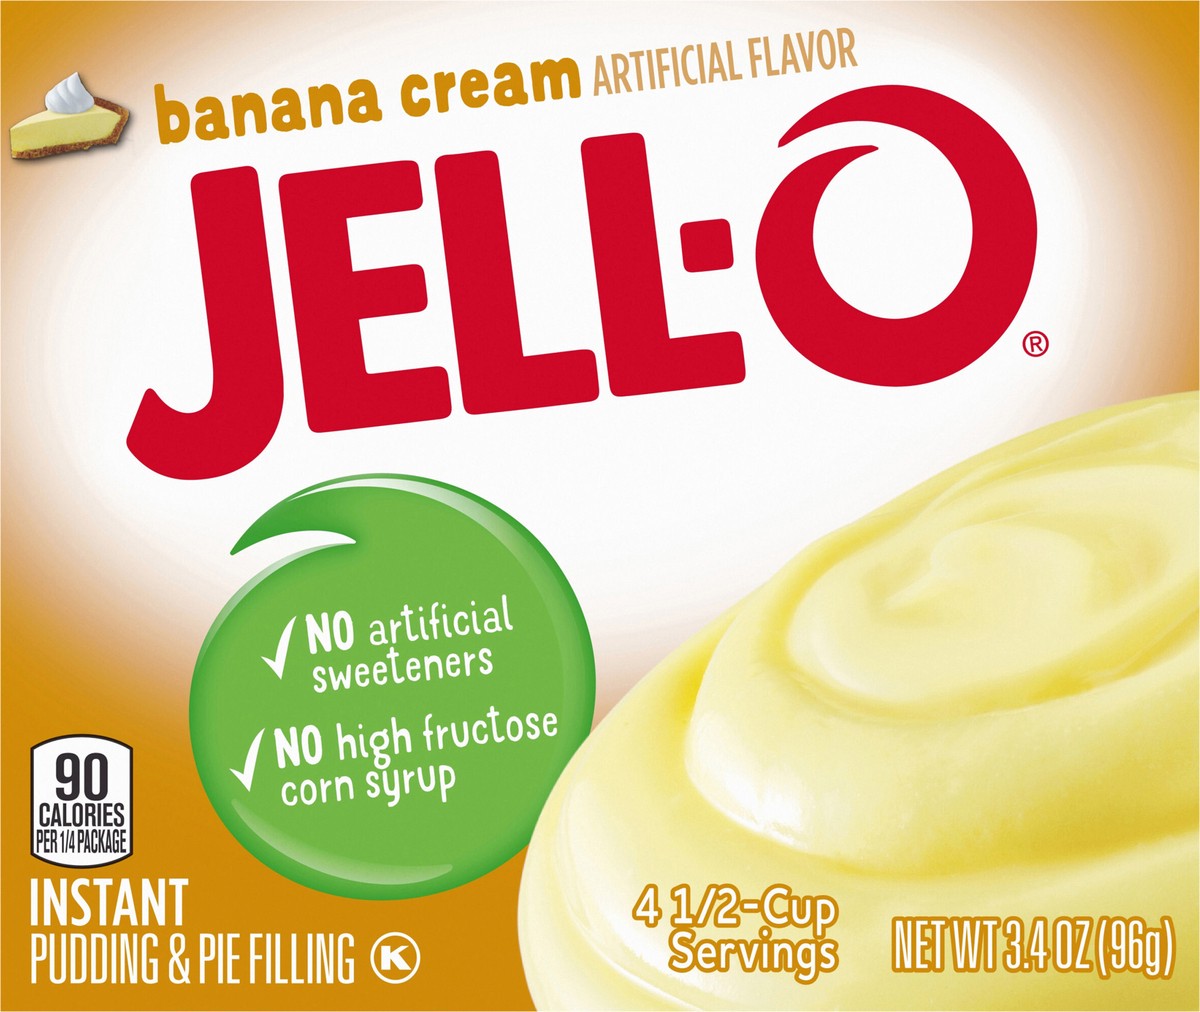 slide 9 of 9, Jell-O Banana Cream Artificially Flavored Instant Pudding & Pie Filling Mix, 3.4 oz. Box, 3.4 oz